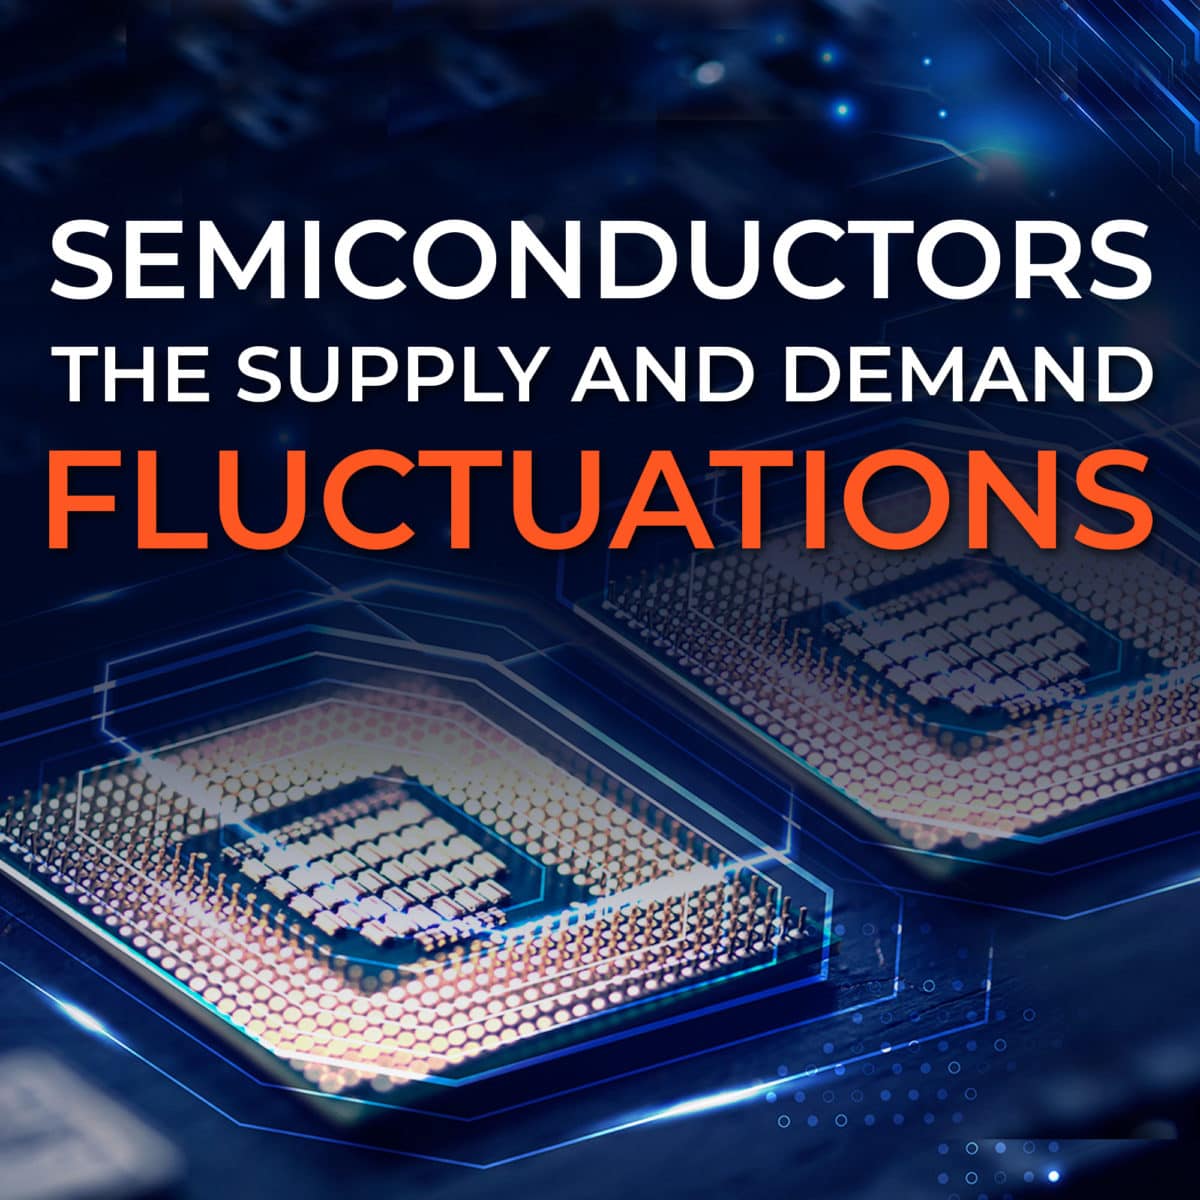 Semiconductors: The Supply and Demand Fluctuations